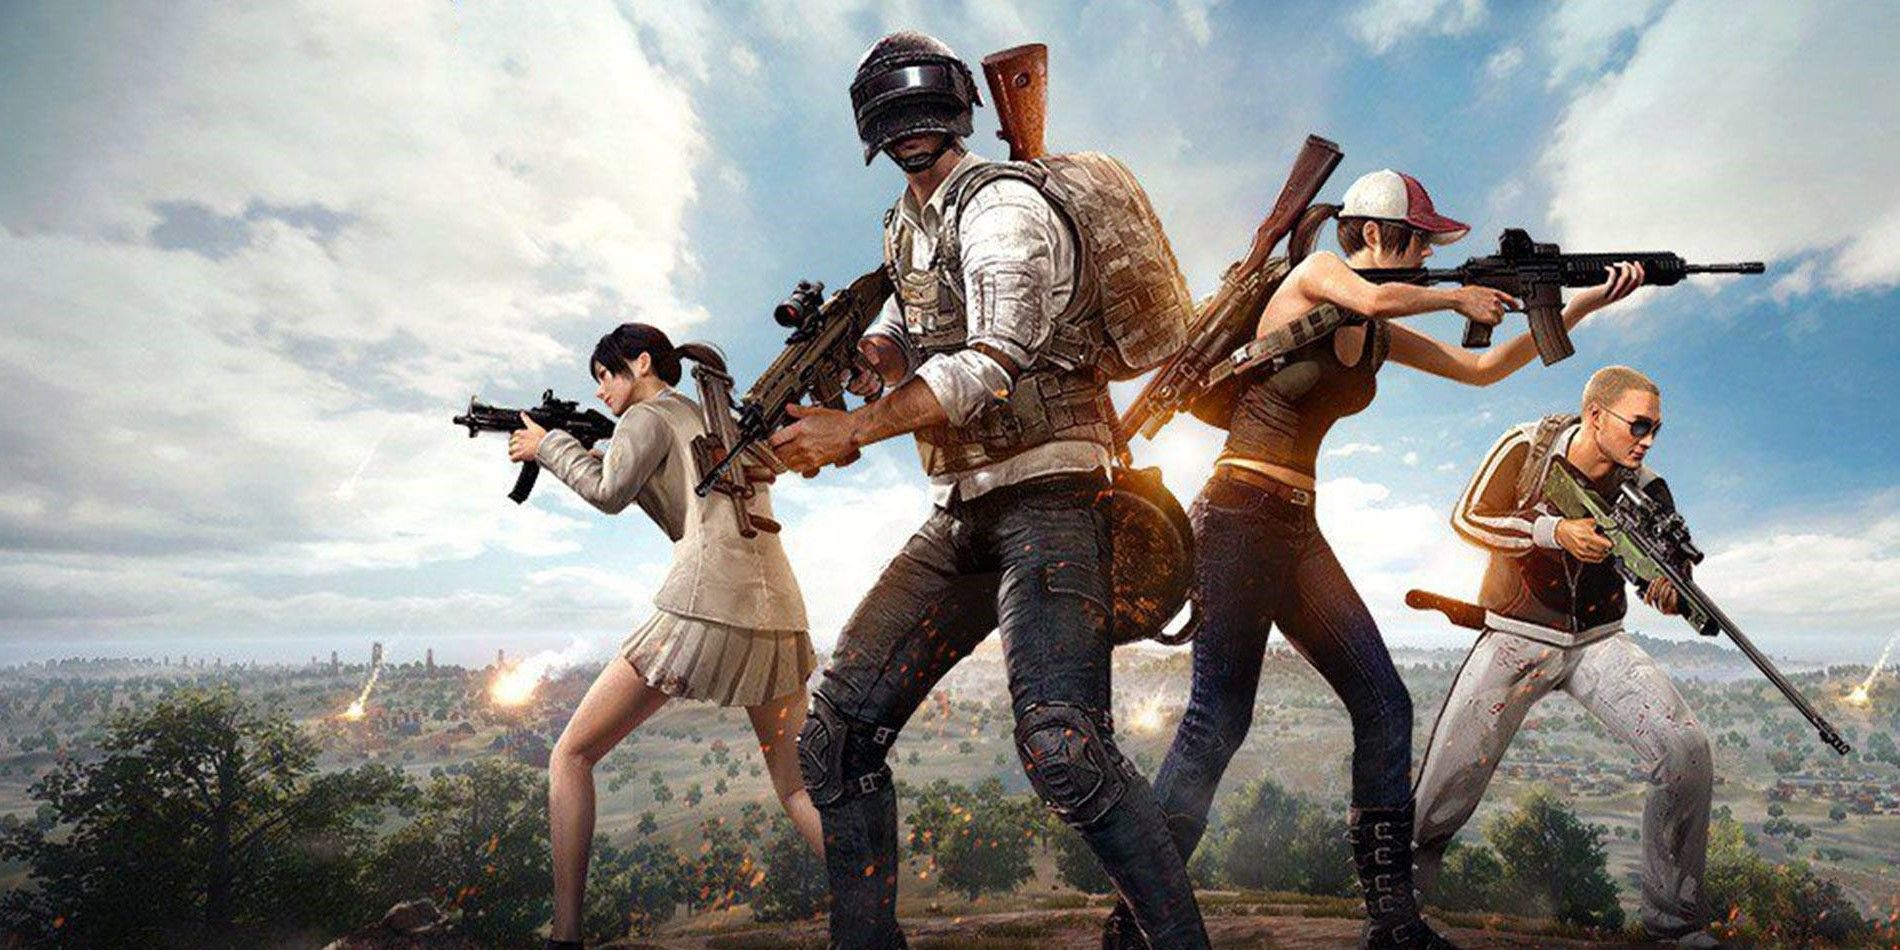 Characters in a promo image for PUBG Mobile